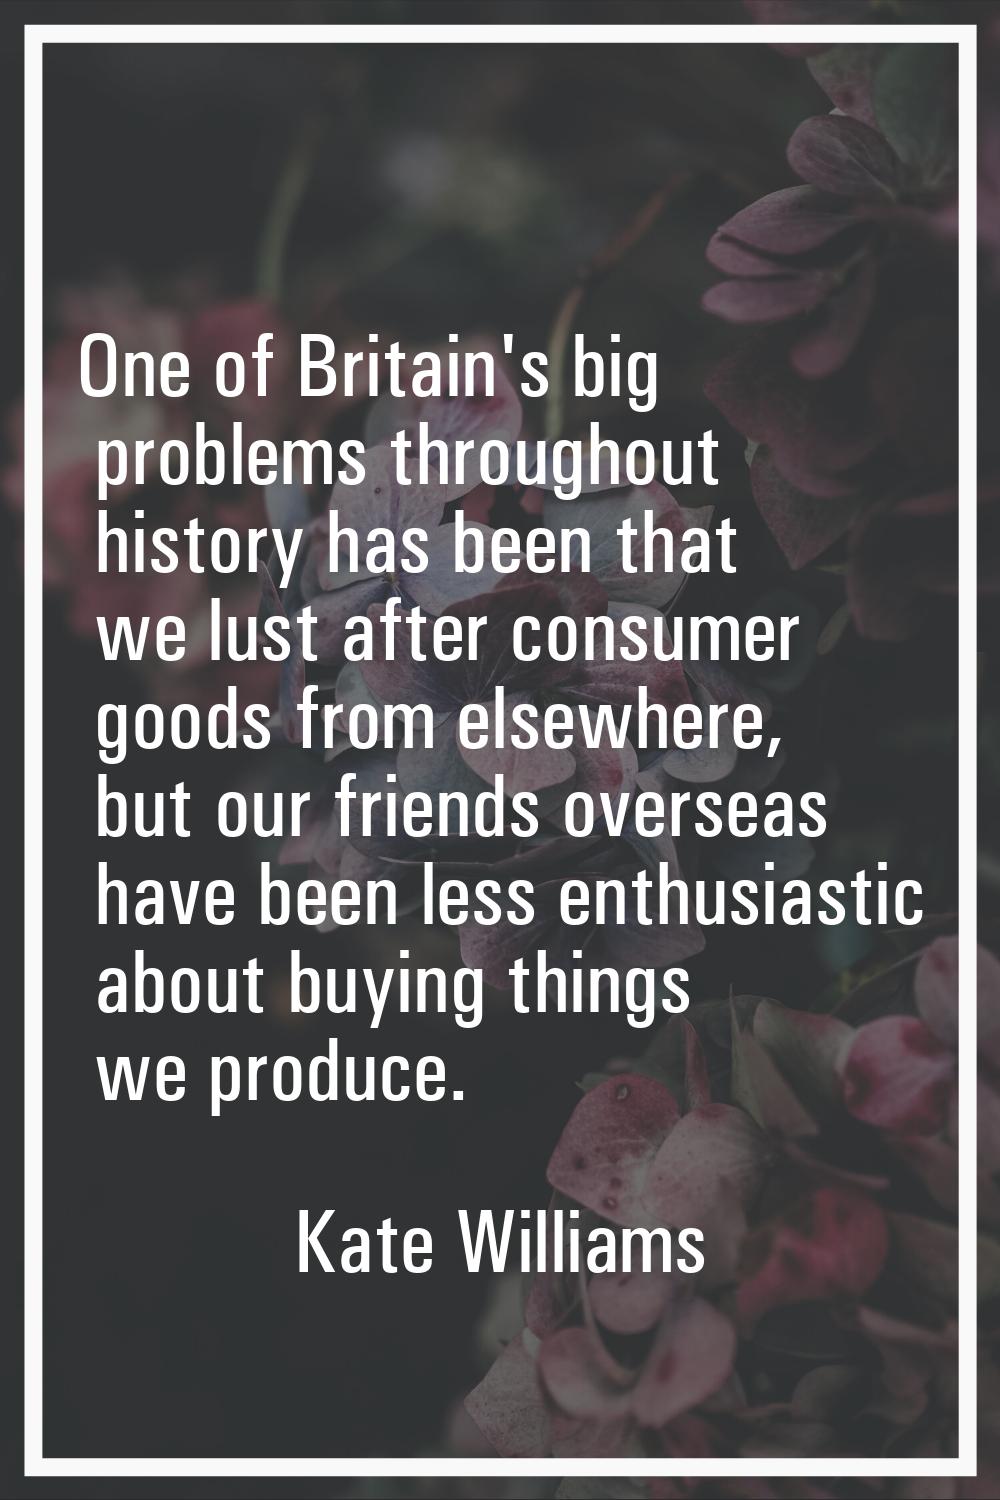 One of Britain's big problems throughout history has been that we lust after consumer goods from el